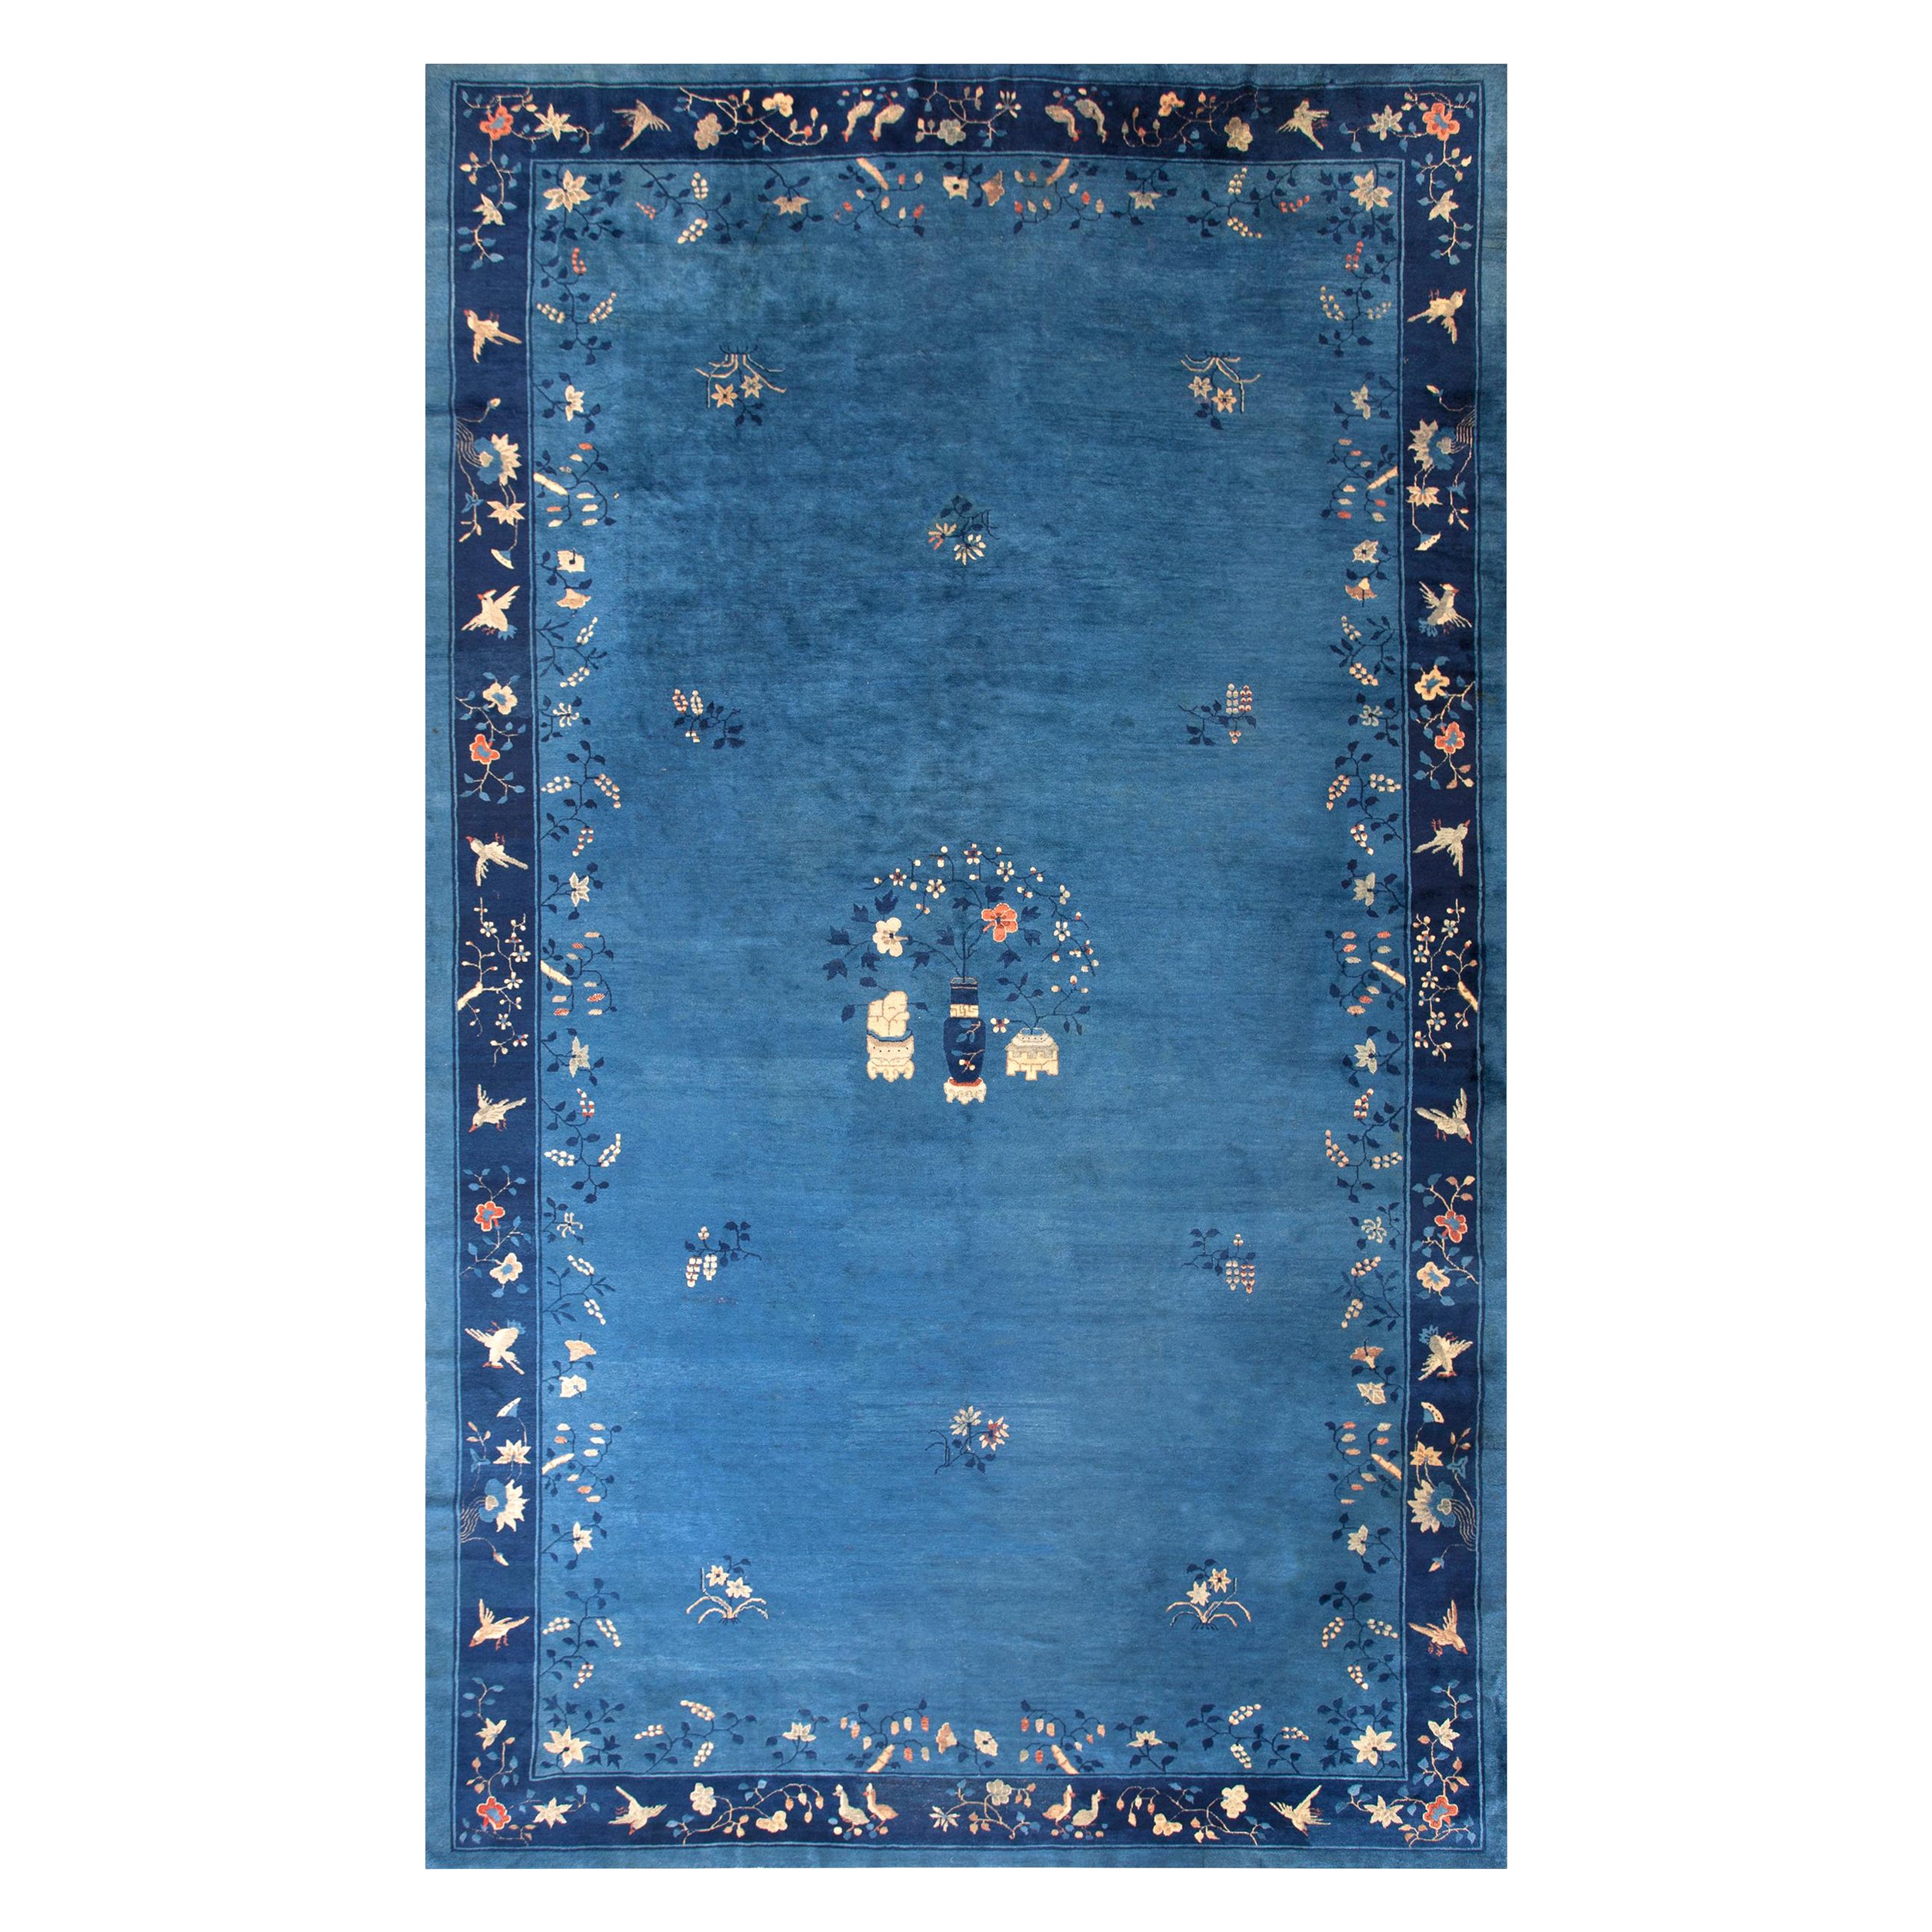 Early 20th Century Chinese Peking Carpet ( 10'2" x 17' - 310 x 518 ) For Sale